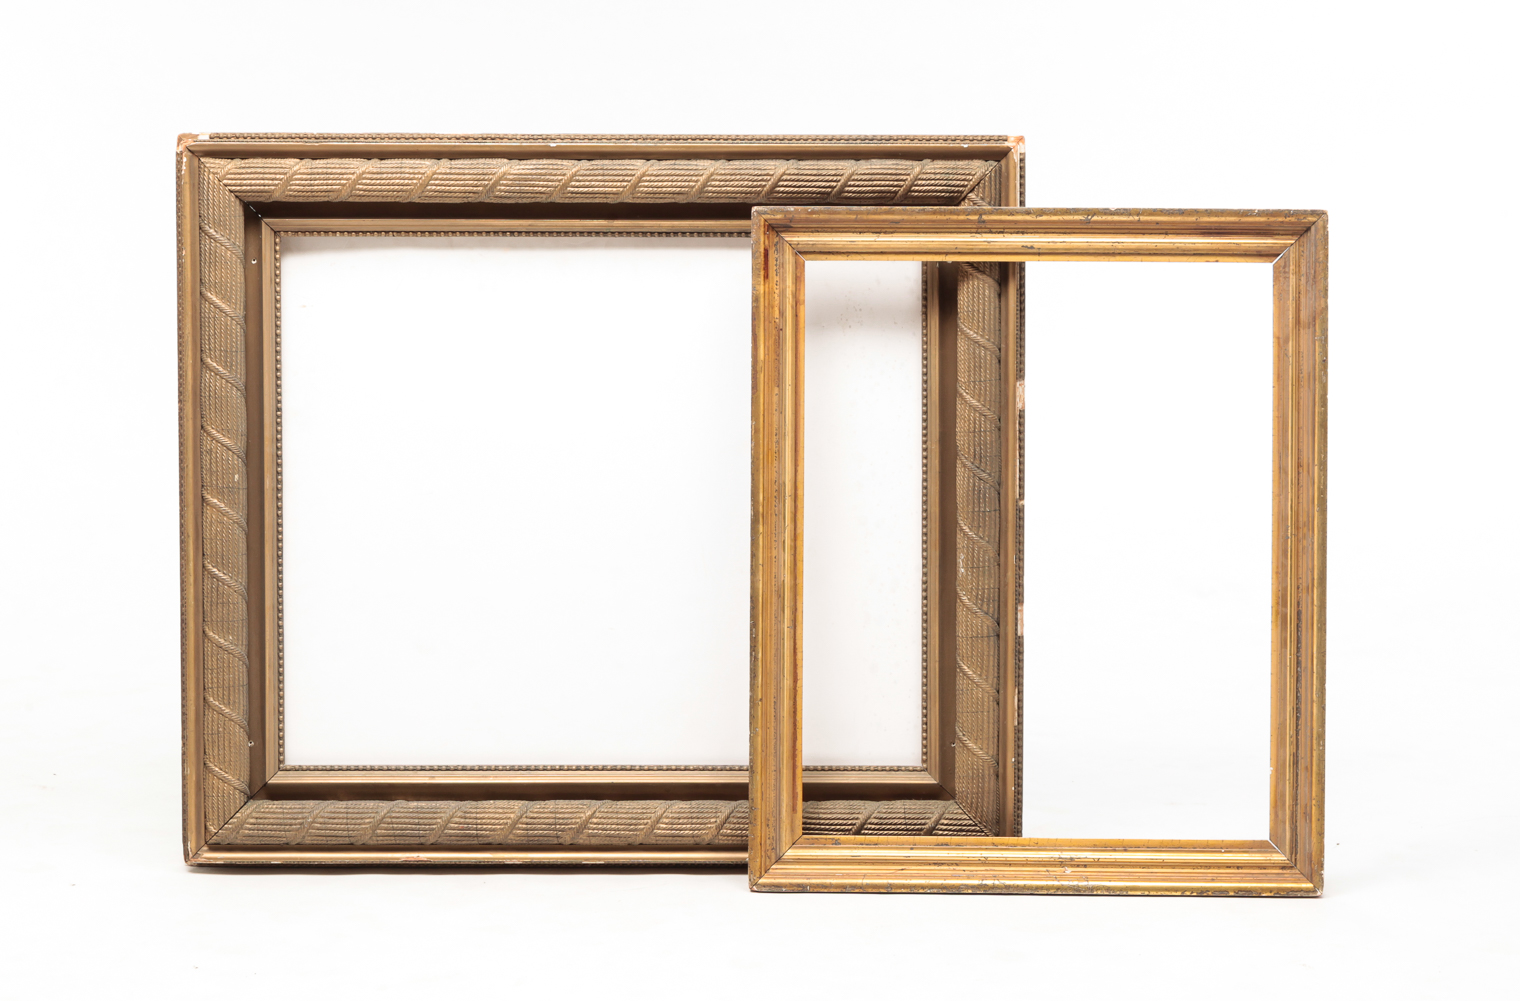 TWO PICTURE FRAMES. American or